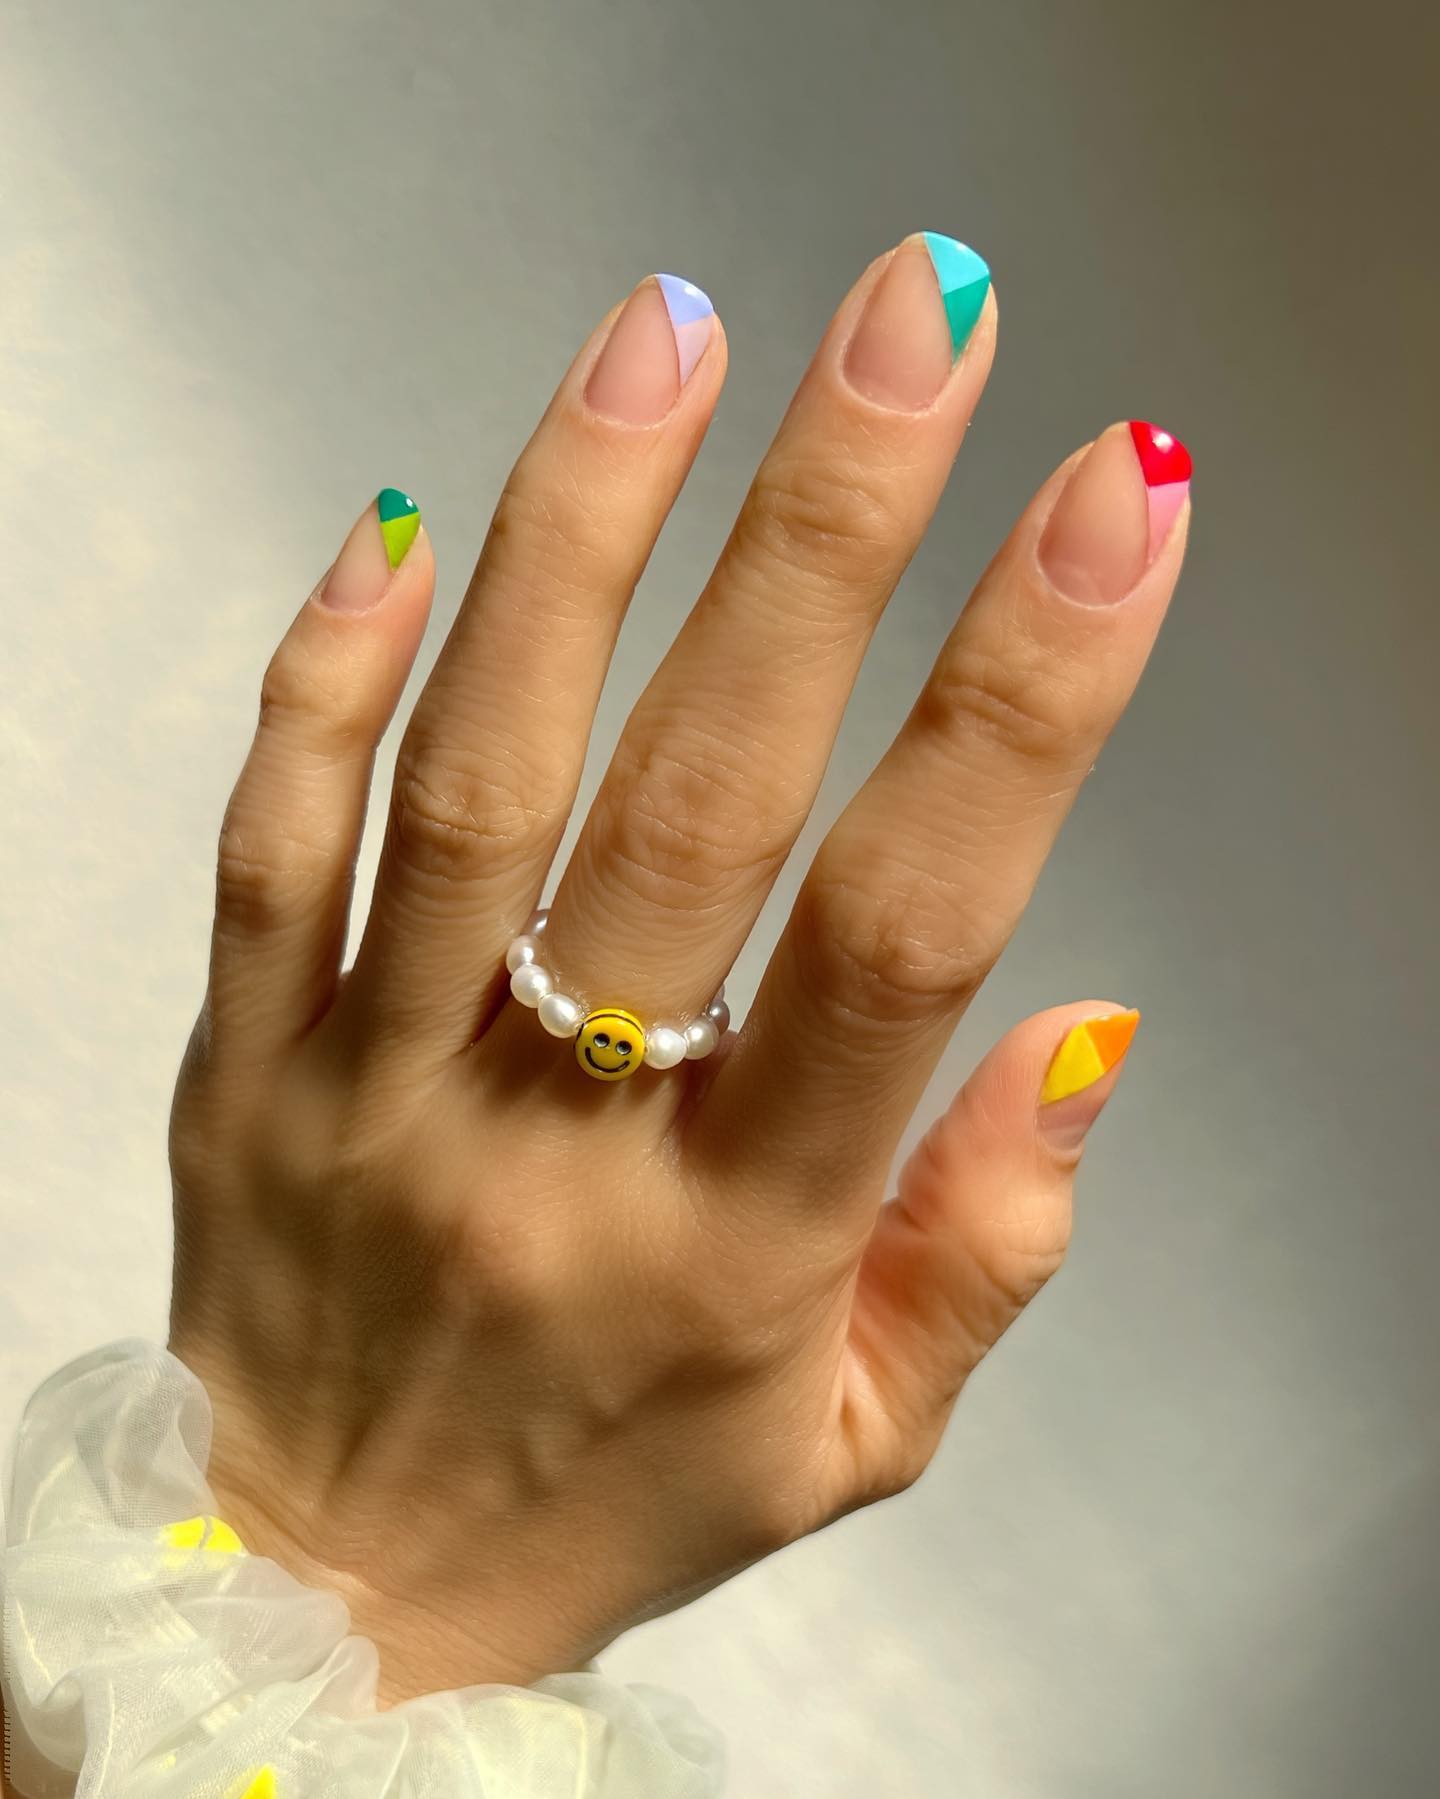 Rainbow Nails Are the Happiest Beauty Trend We've Seen | Who What Wear UK